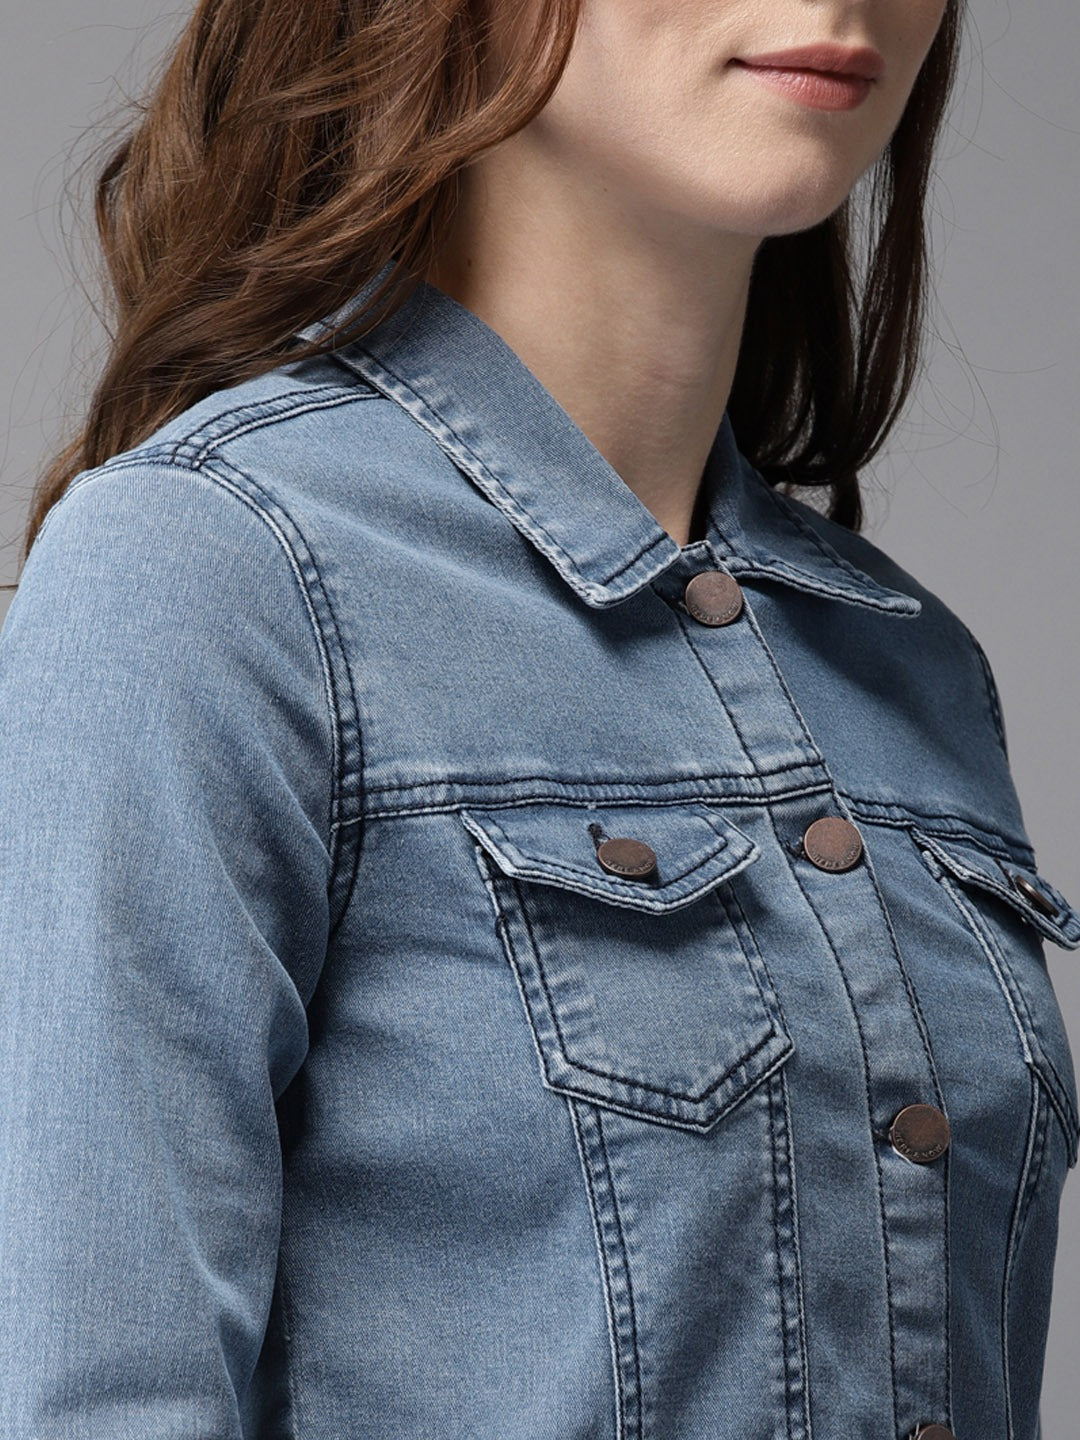 Denim jacket for women, featuring a cropped design and solid blue color, with buttons and pockets on the front.